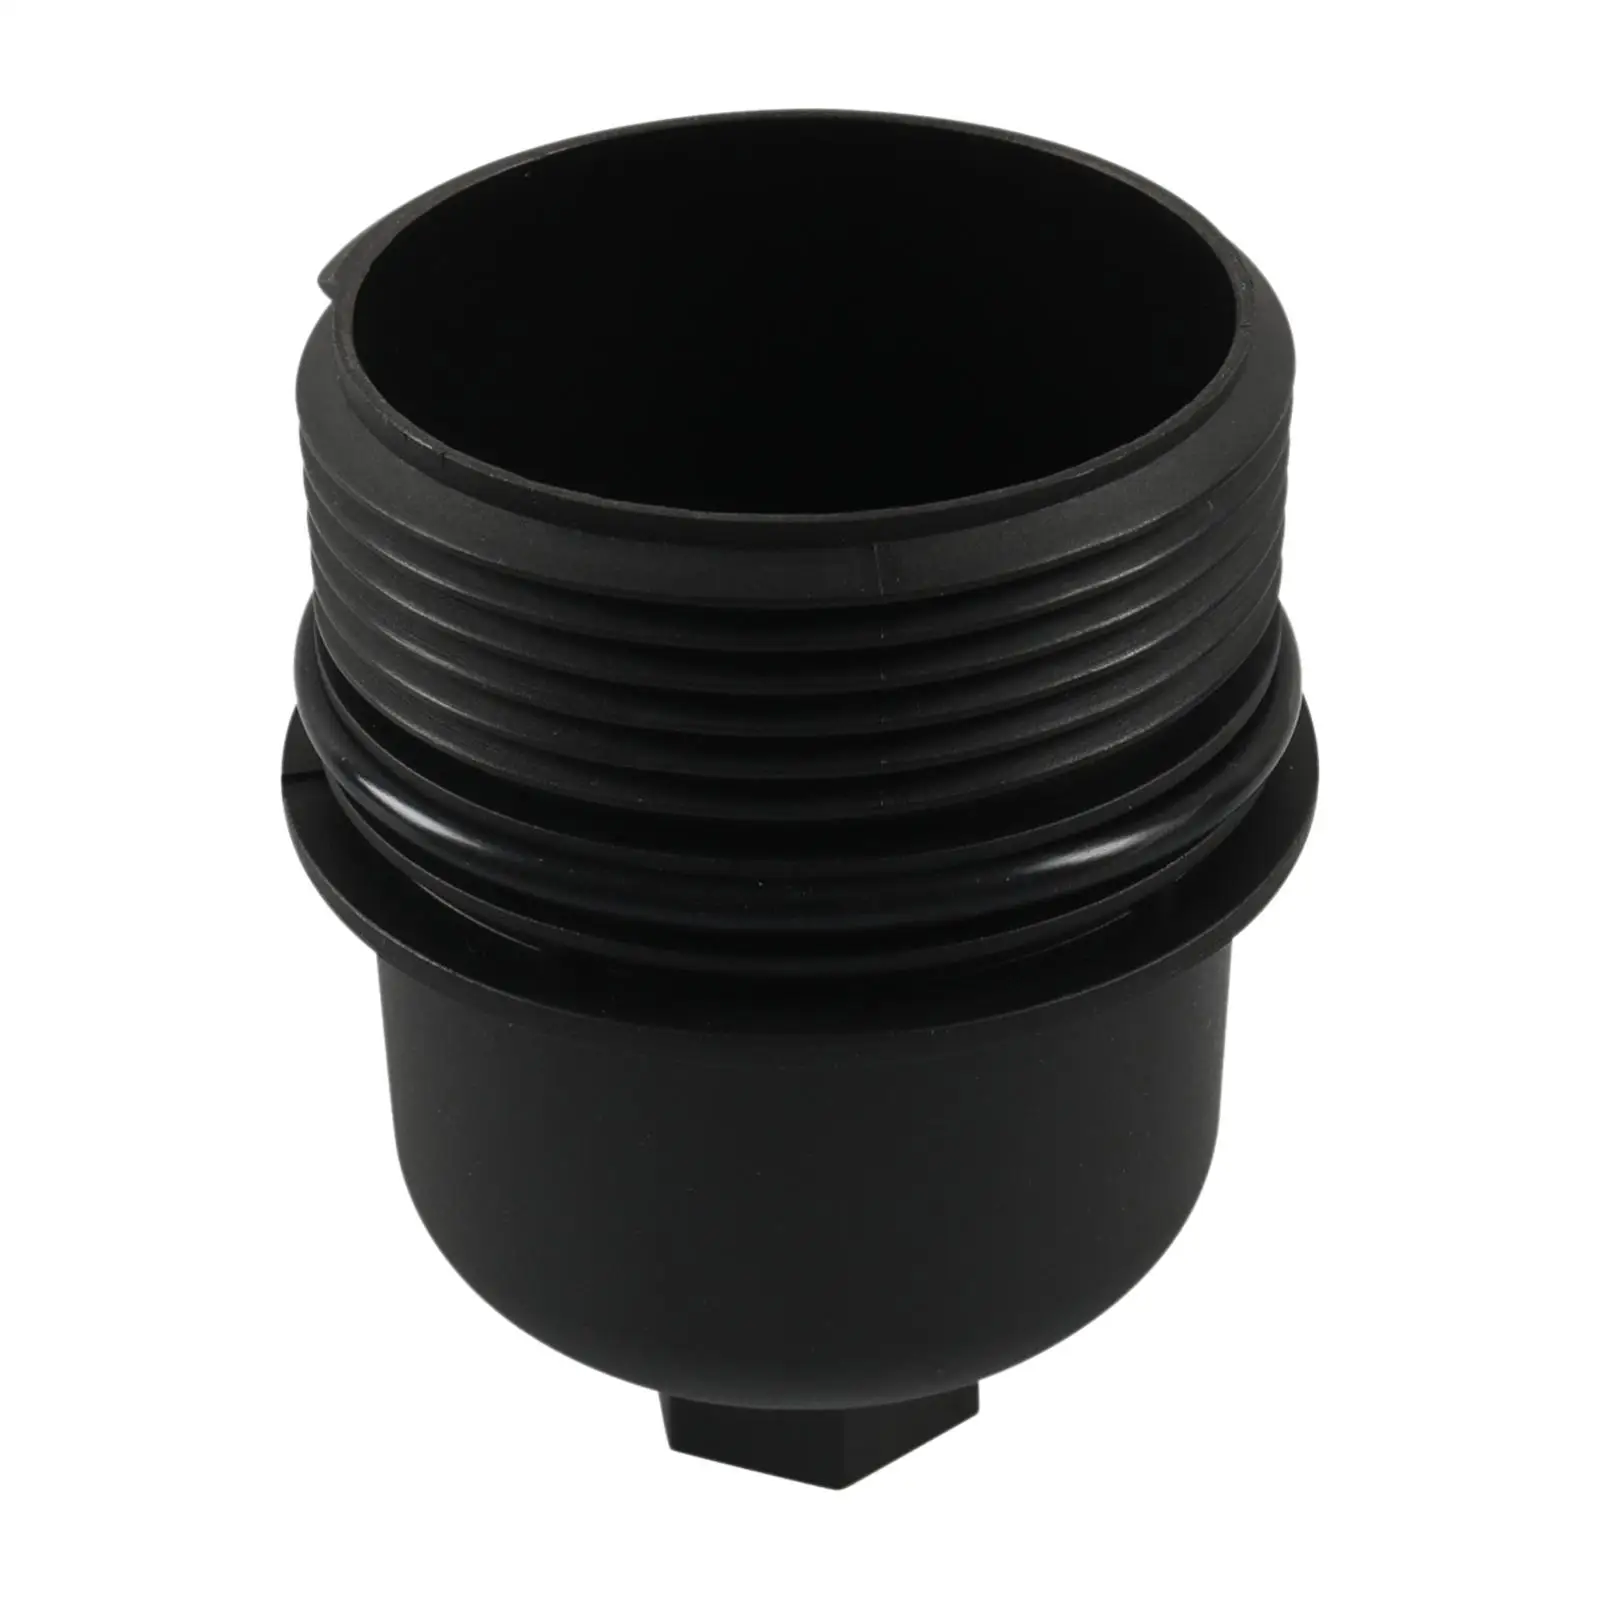 68191350AA-001 Oil Filter Housing Cap Cover for Charger Direct Replaces